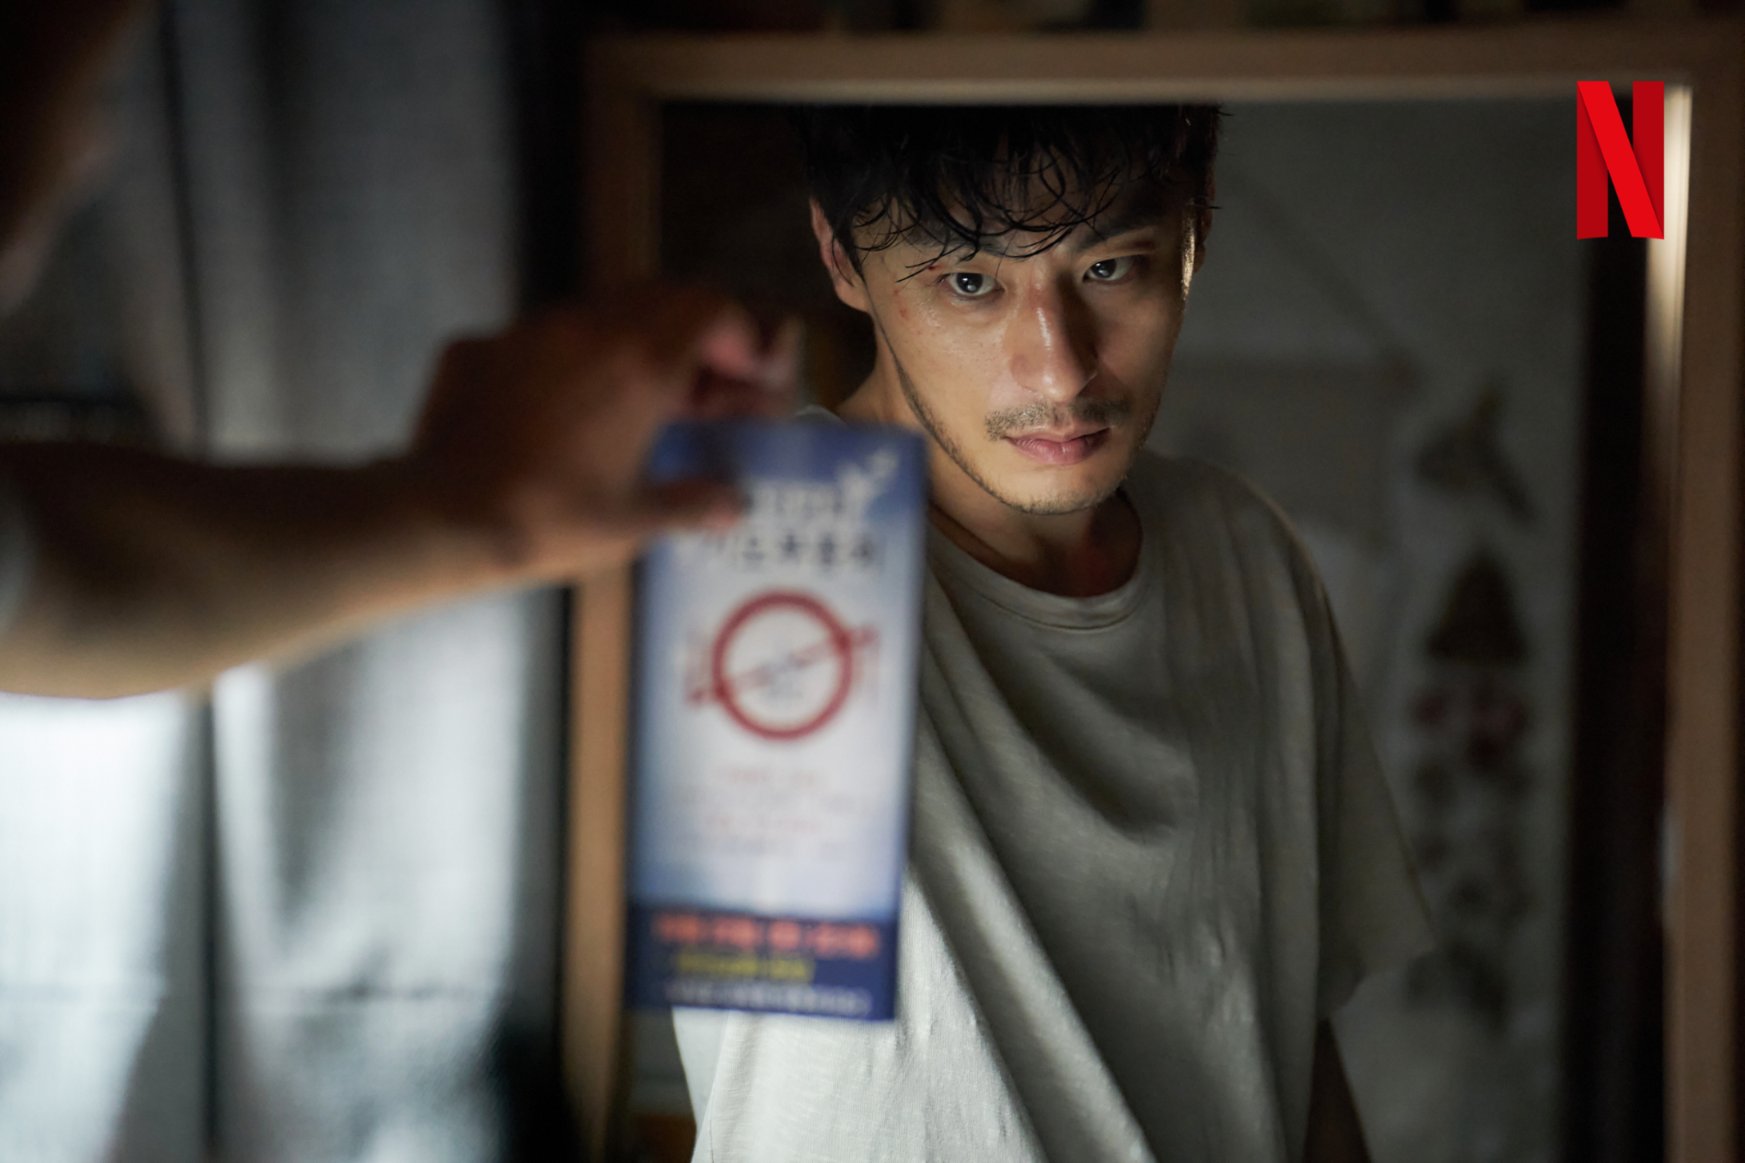 Jeon So Nee, Goo Kyo Hwan, Lee Jung Hyun, and More Are Entangled With Mysterious Parasites In “Parasyte: The Grey”